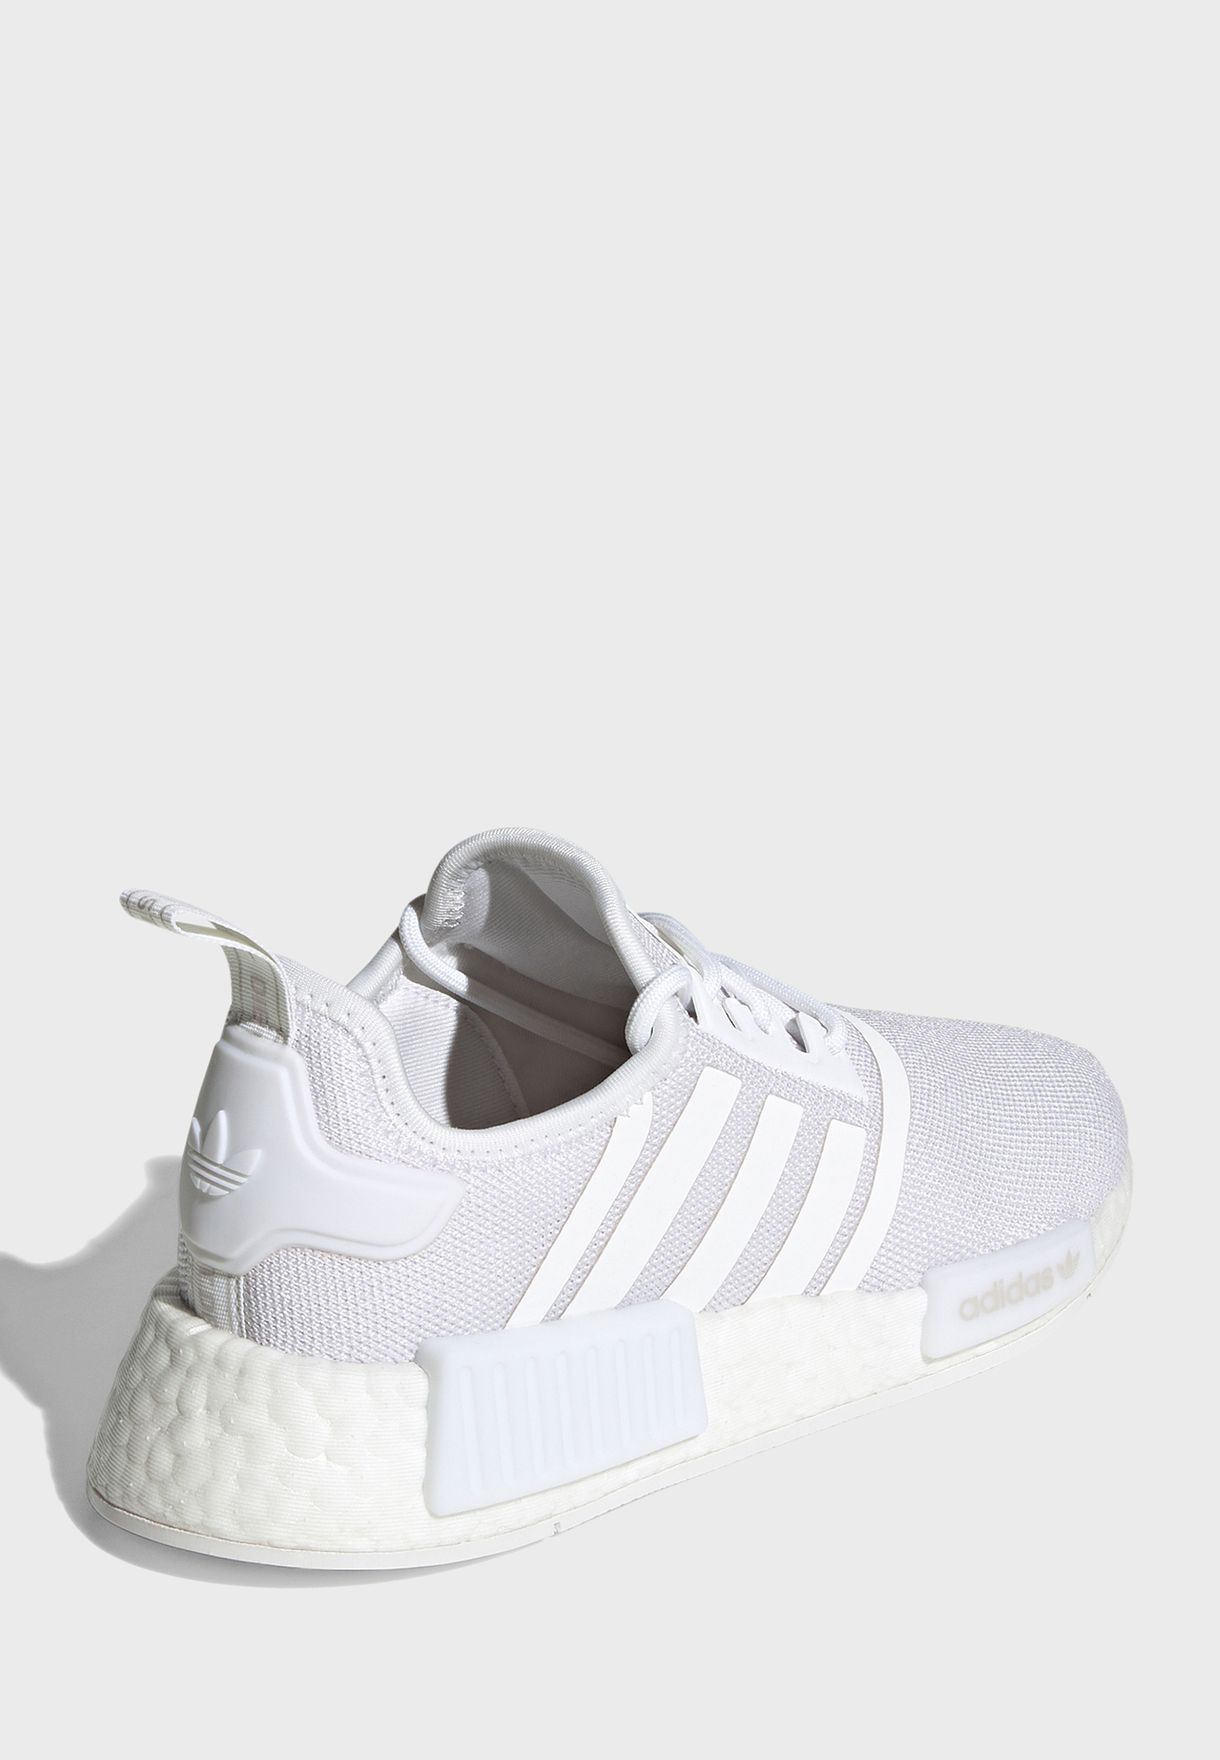 Youth Nmd_R1 Primeblue